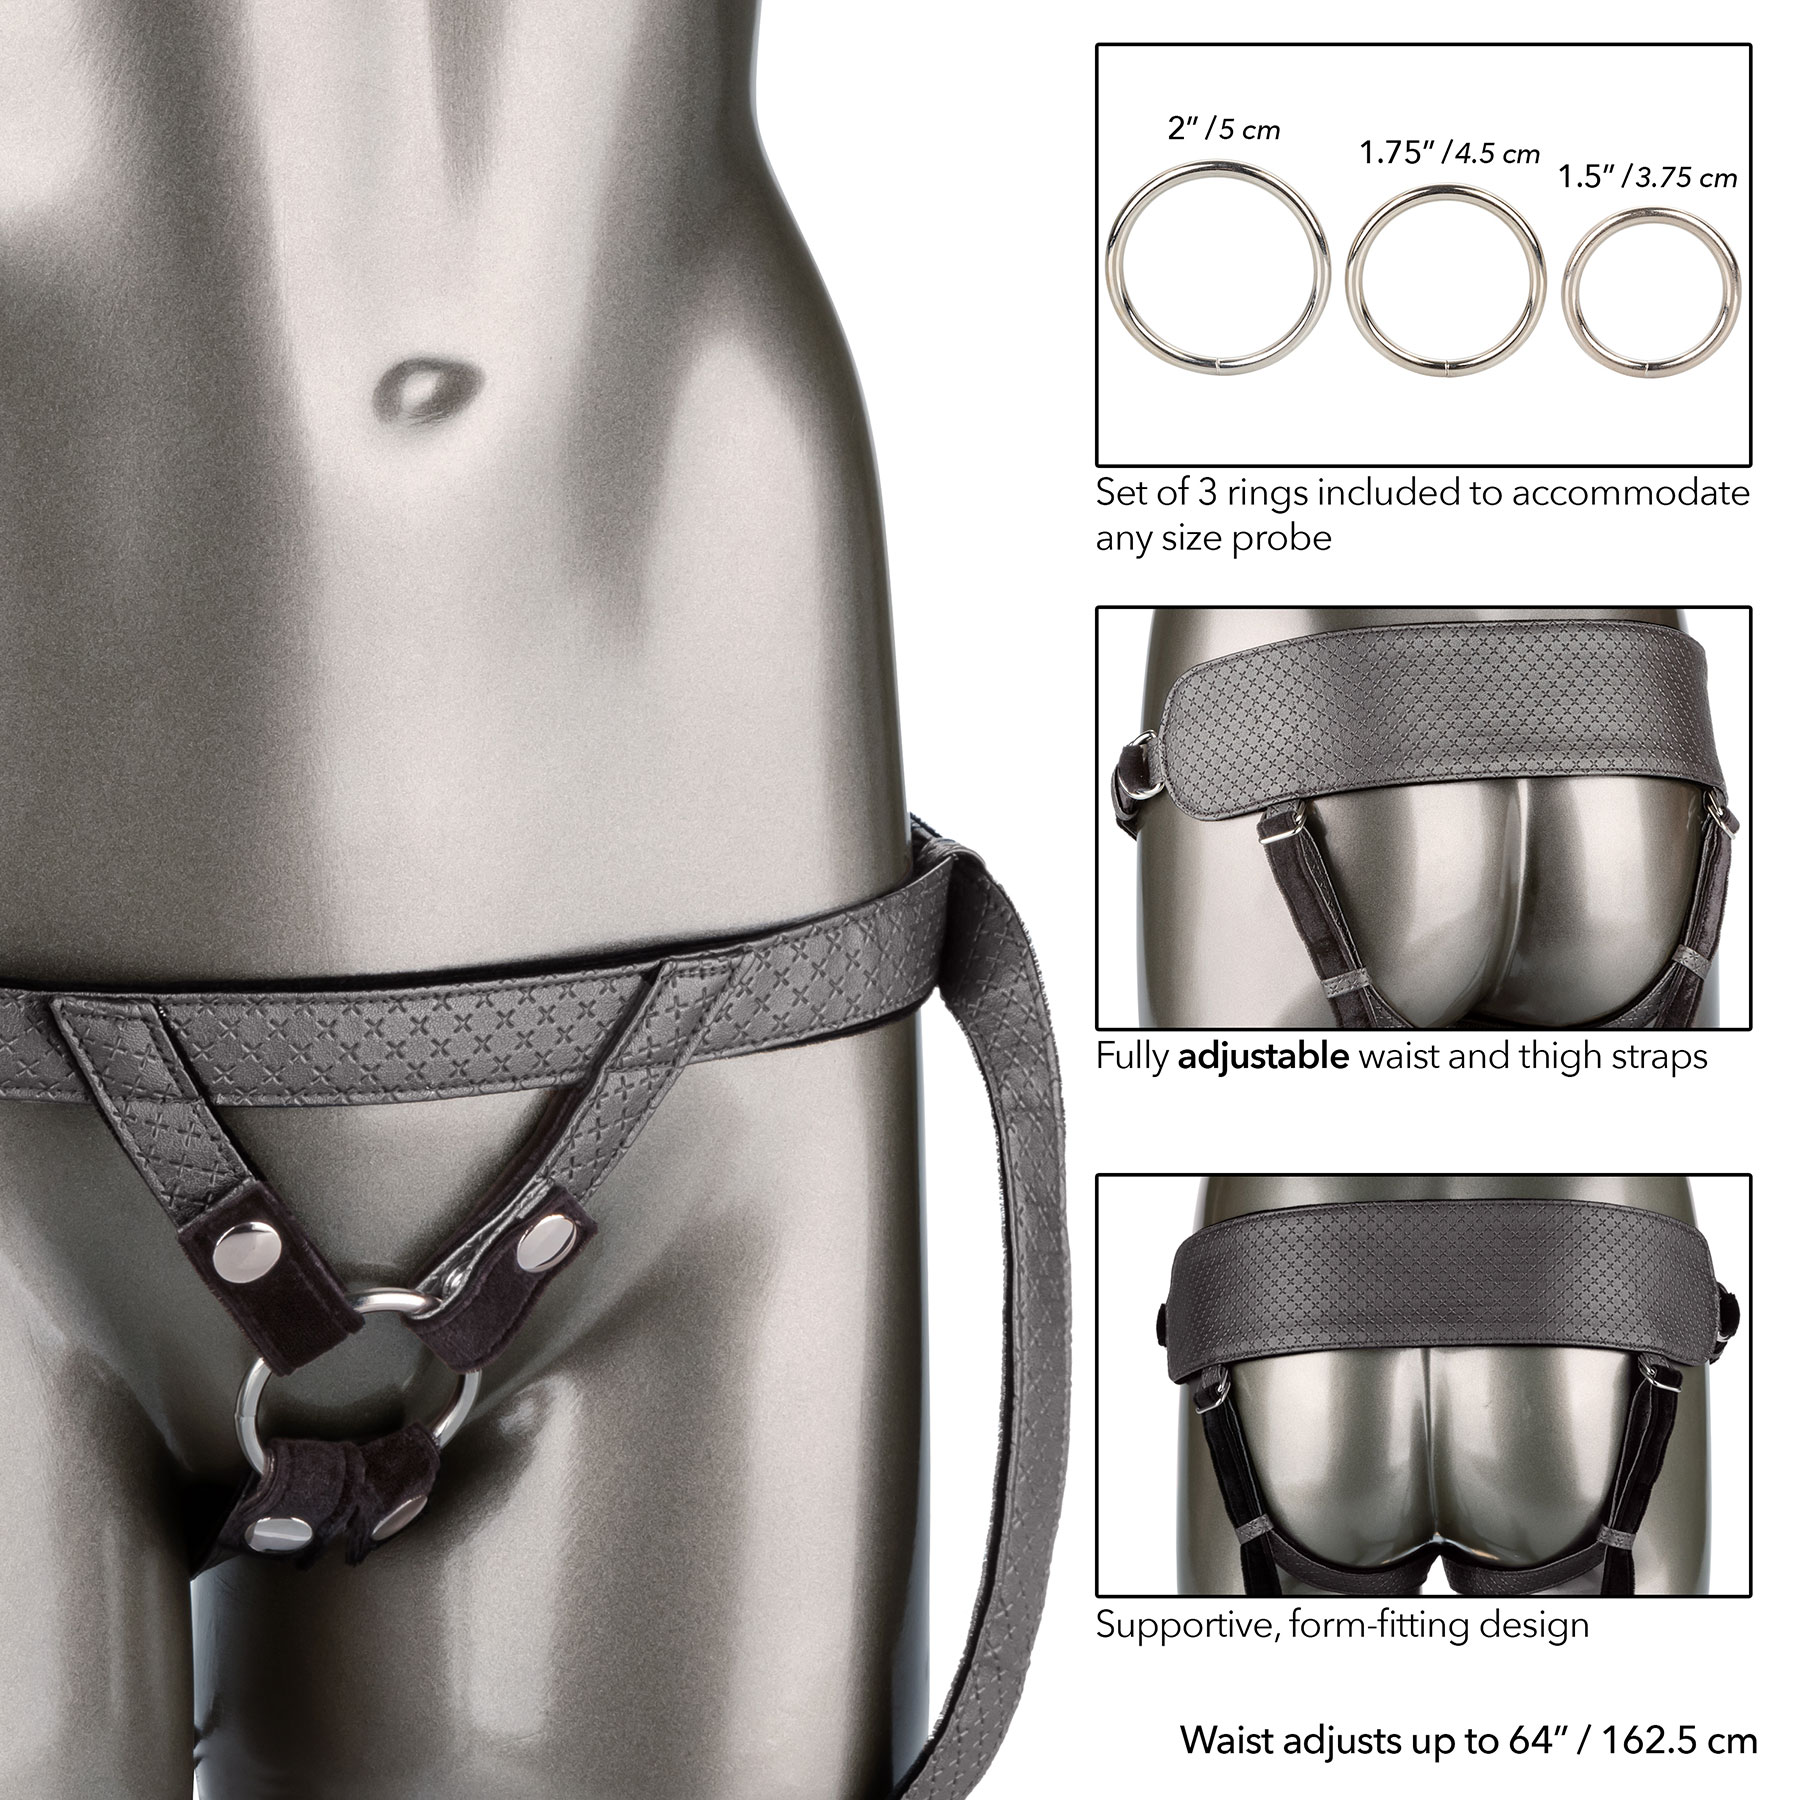 Her Royal Harness The Royal Vibrating Set With Vibrating Silicone Probe - Features